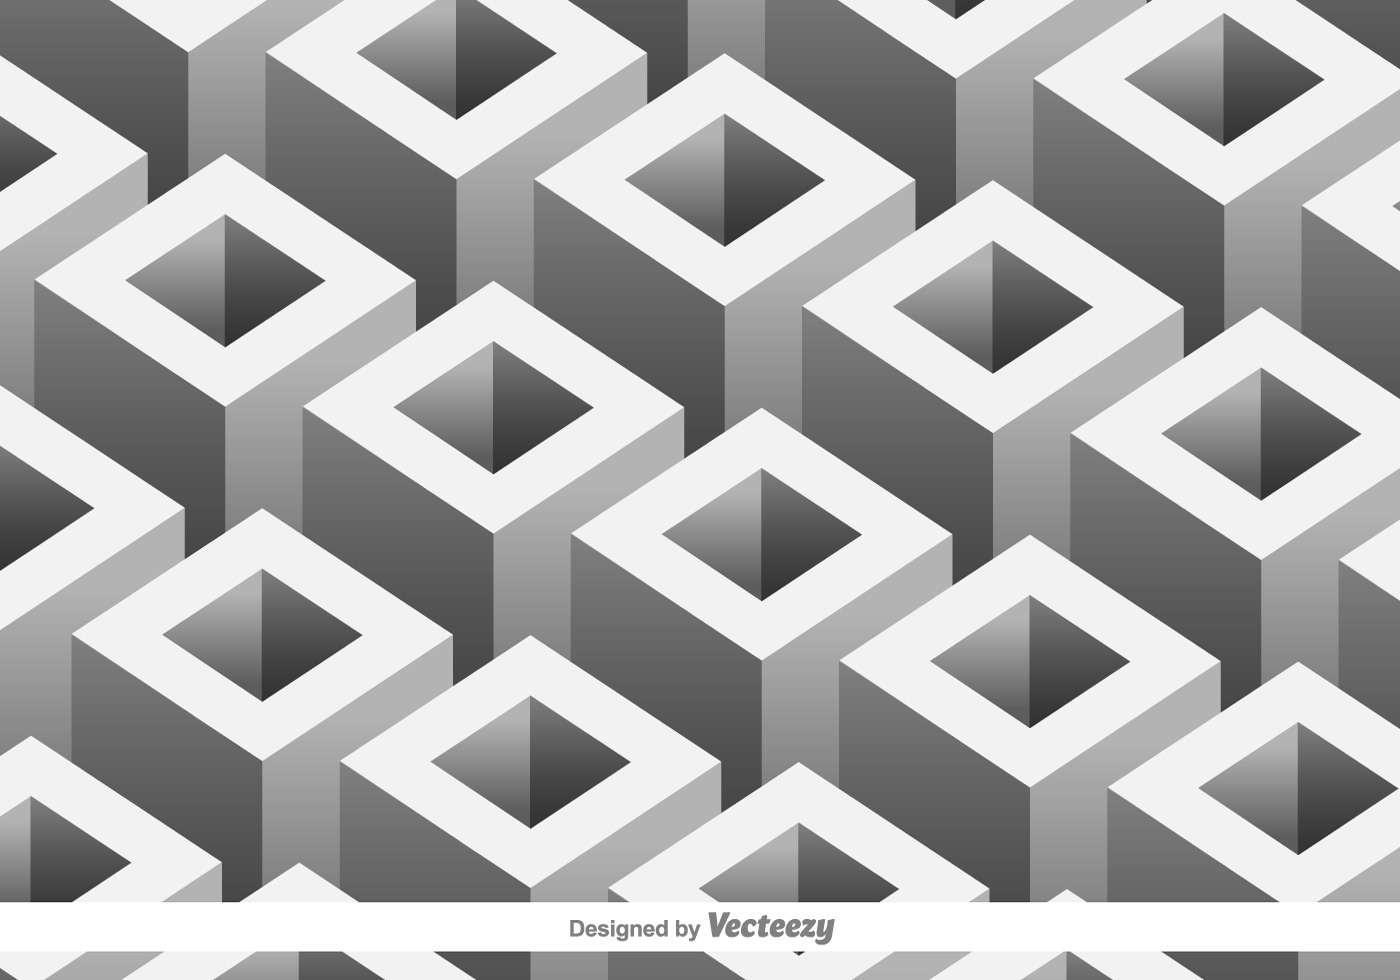 Download Vector pattern with 3D geometric shapes - Download Free ...